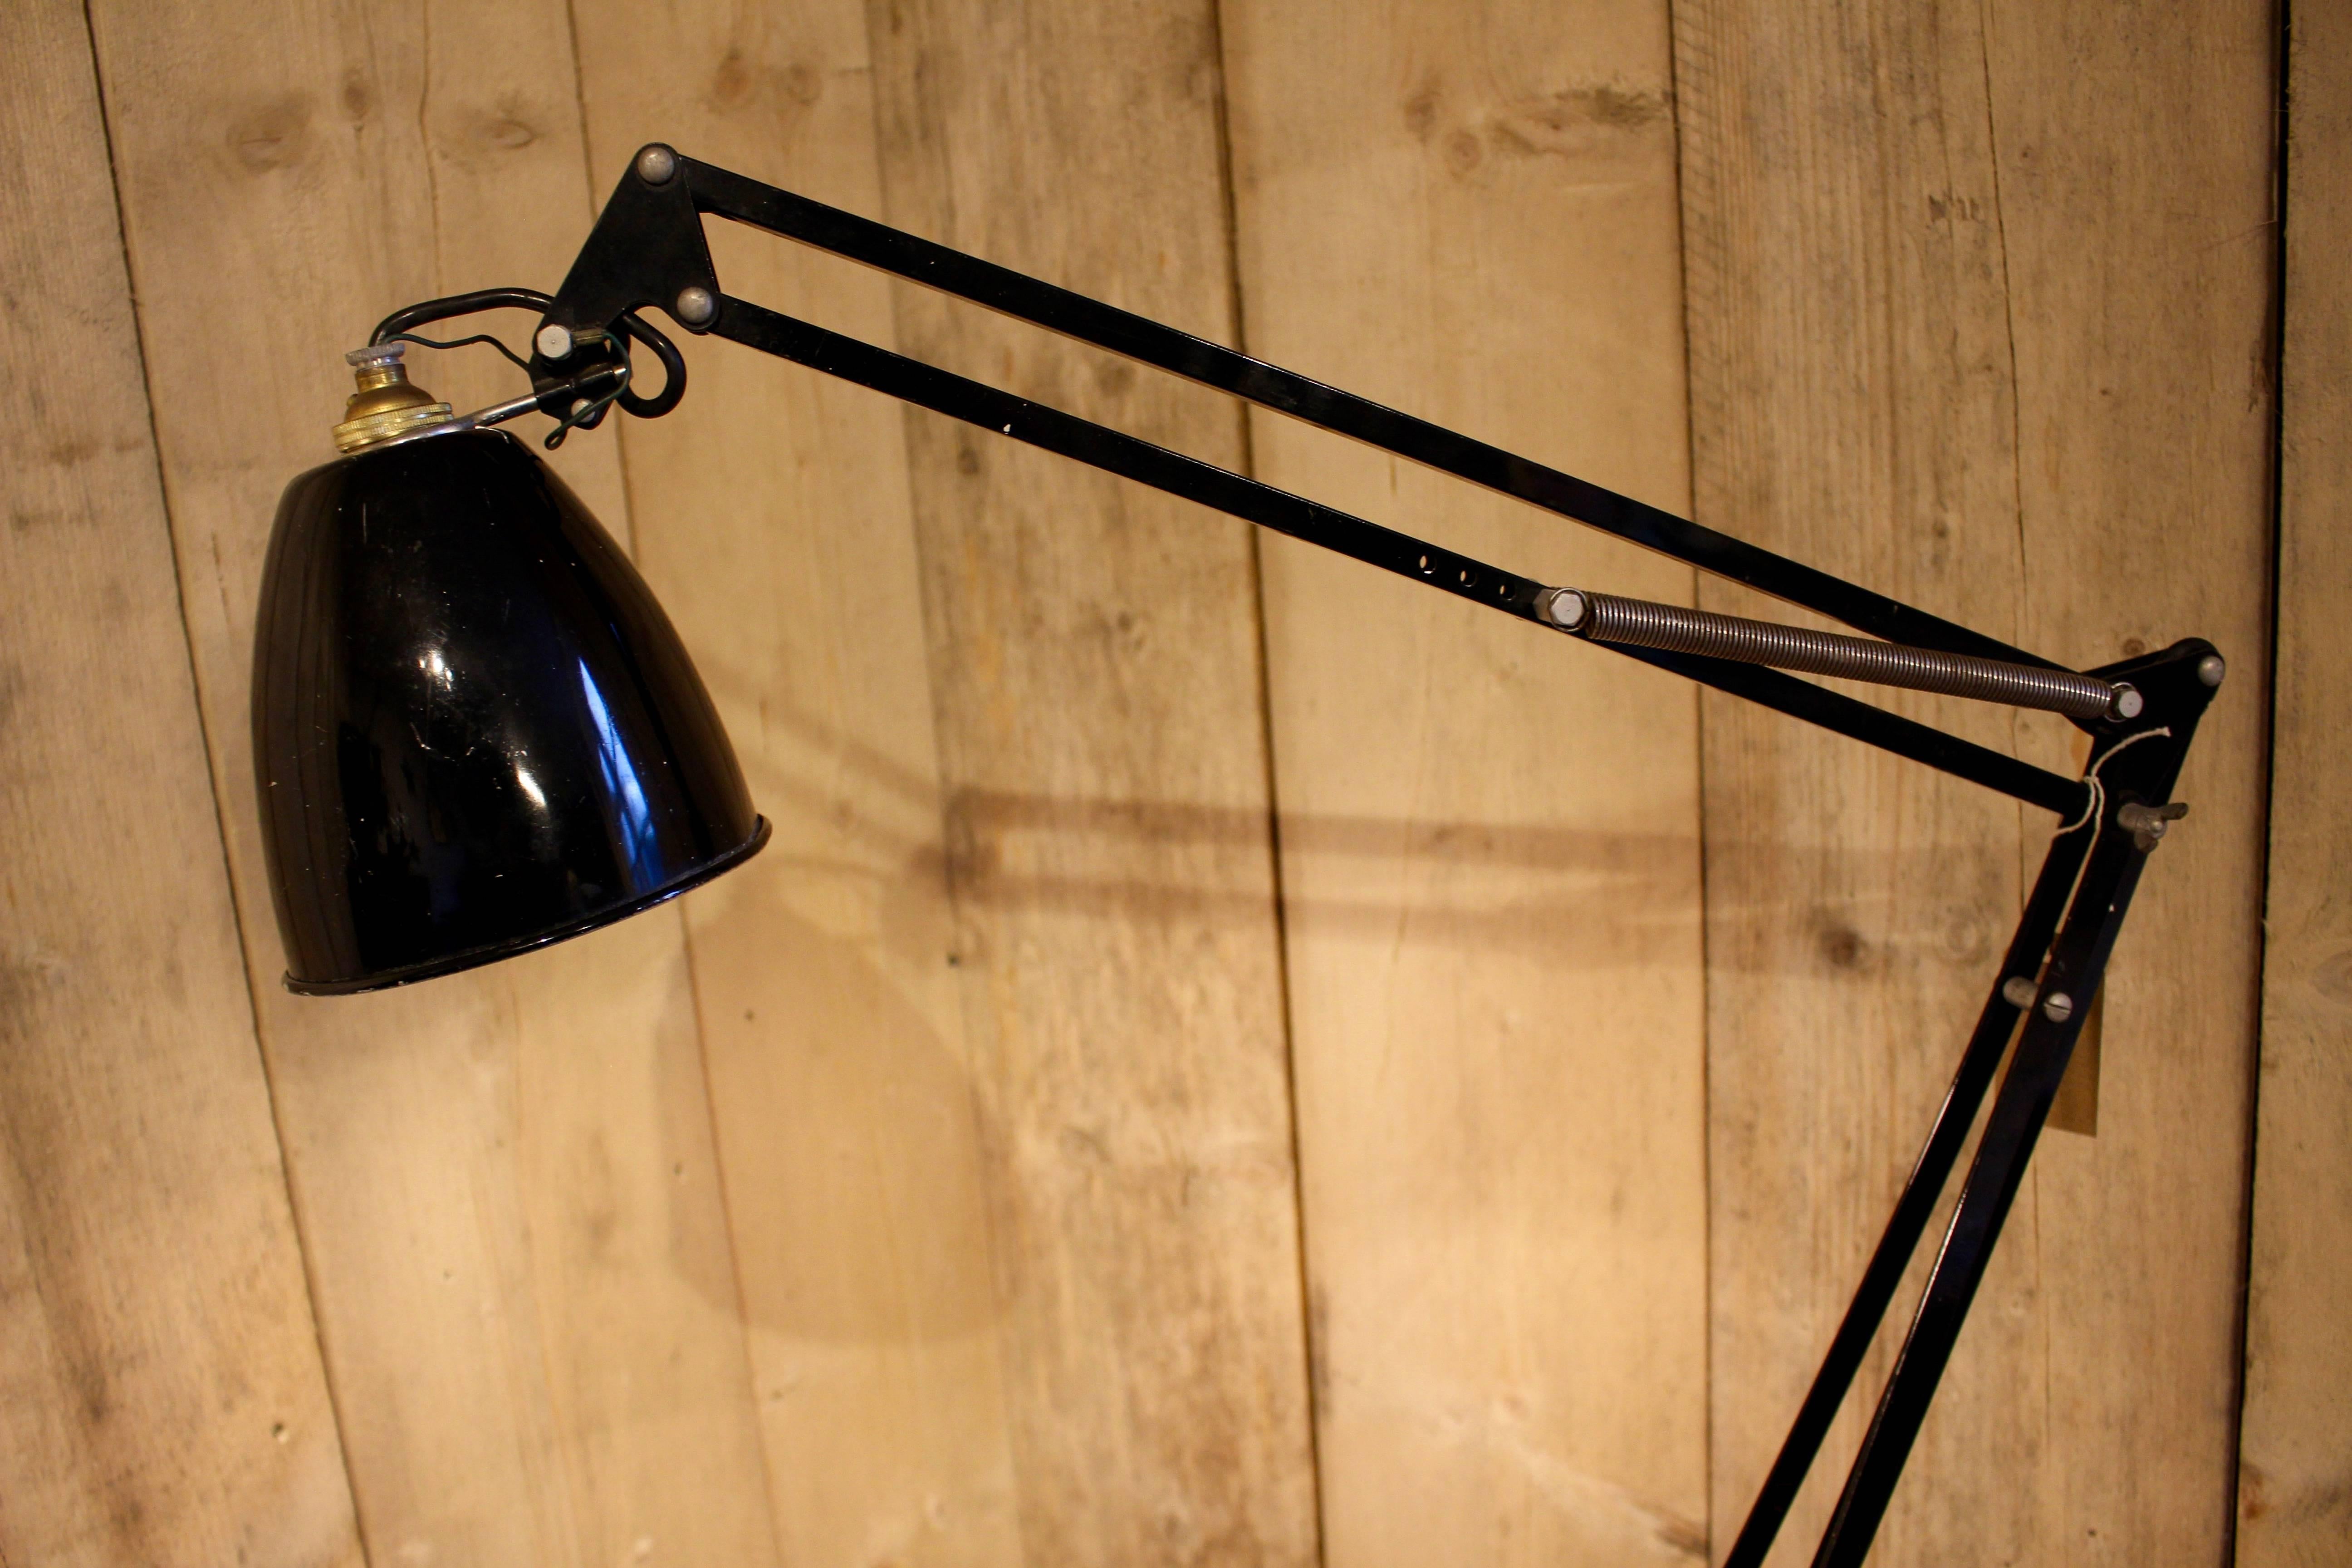 A beautiful example of a post war 4 spring Model 1209 Anglepoise trolley floor lamp manufactured by Herbert Terry & Sons, Redditch, England.
It has been stripped and polished to a super vintage condition.
This is the medical trolley lamp version